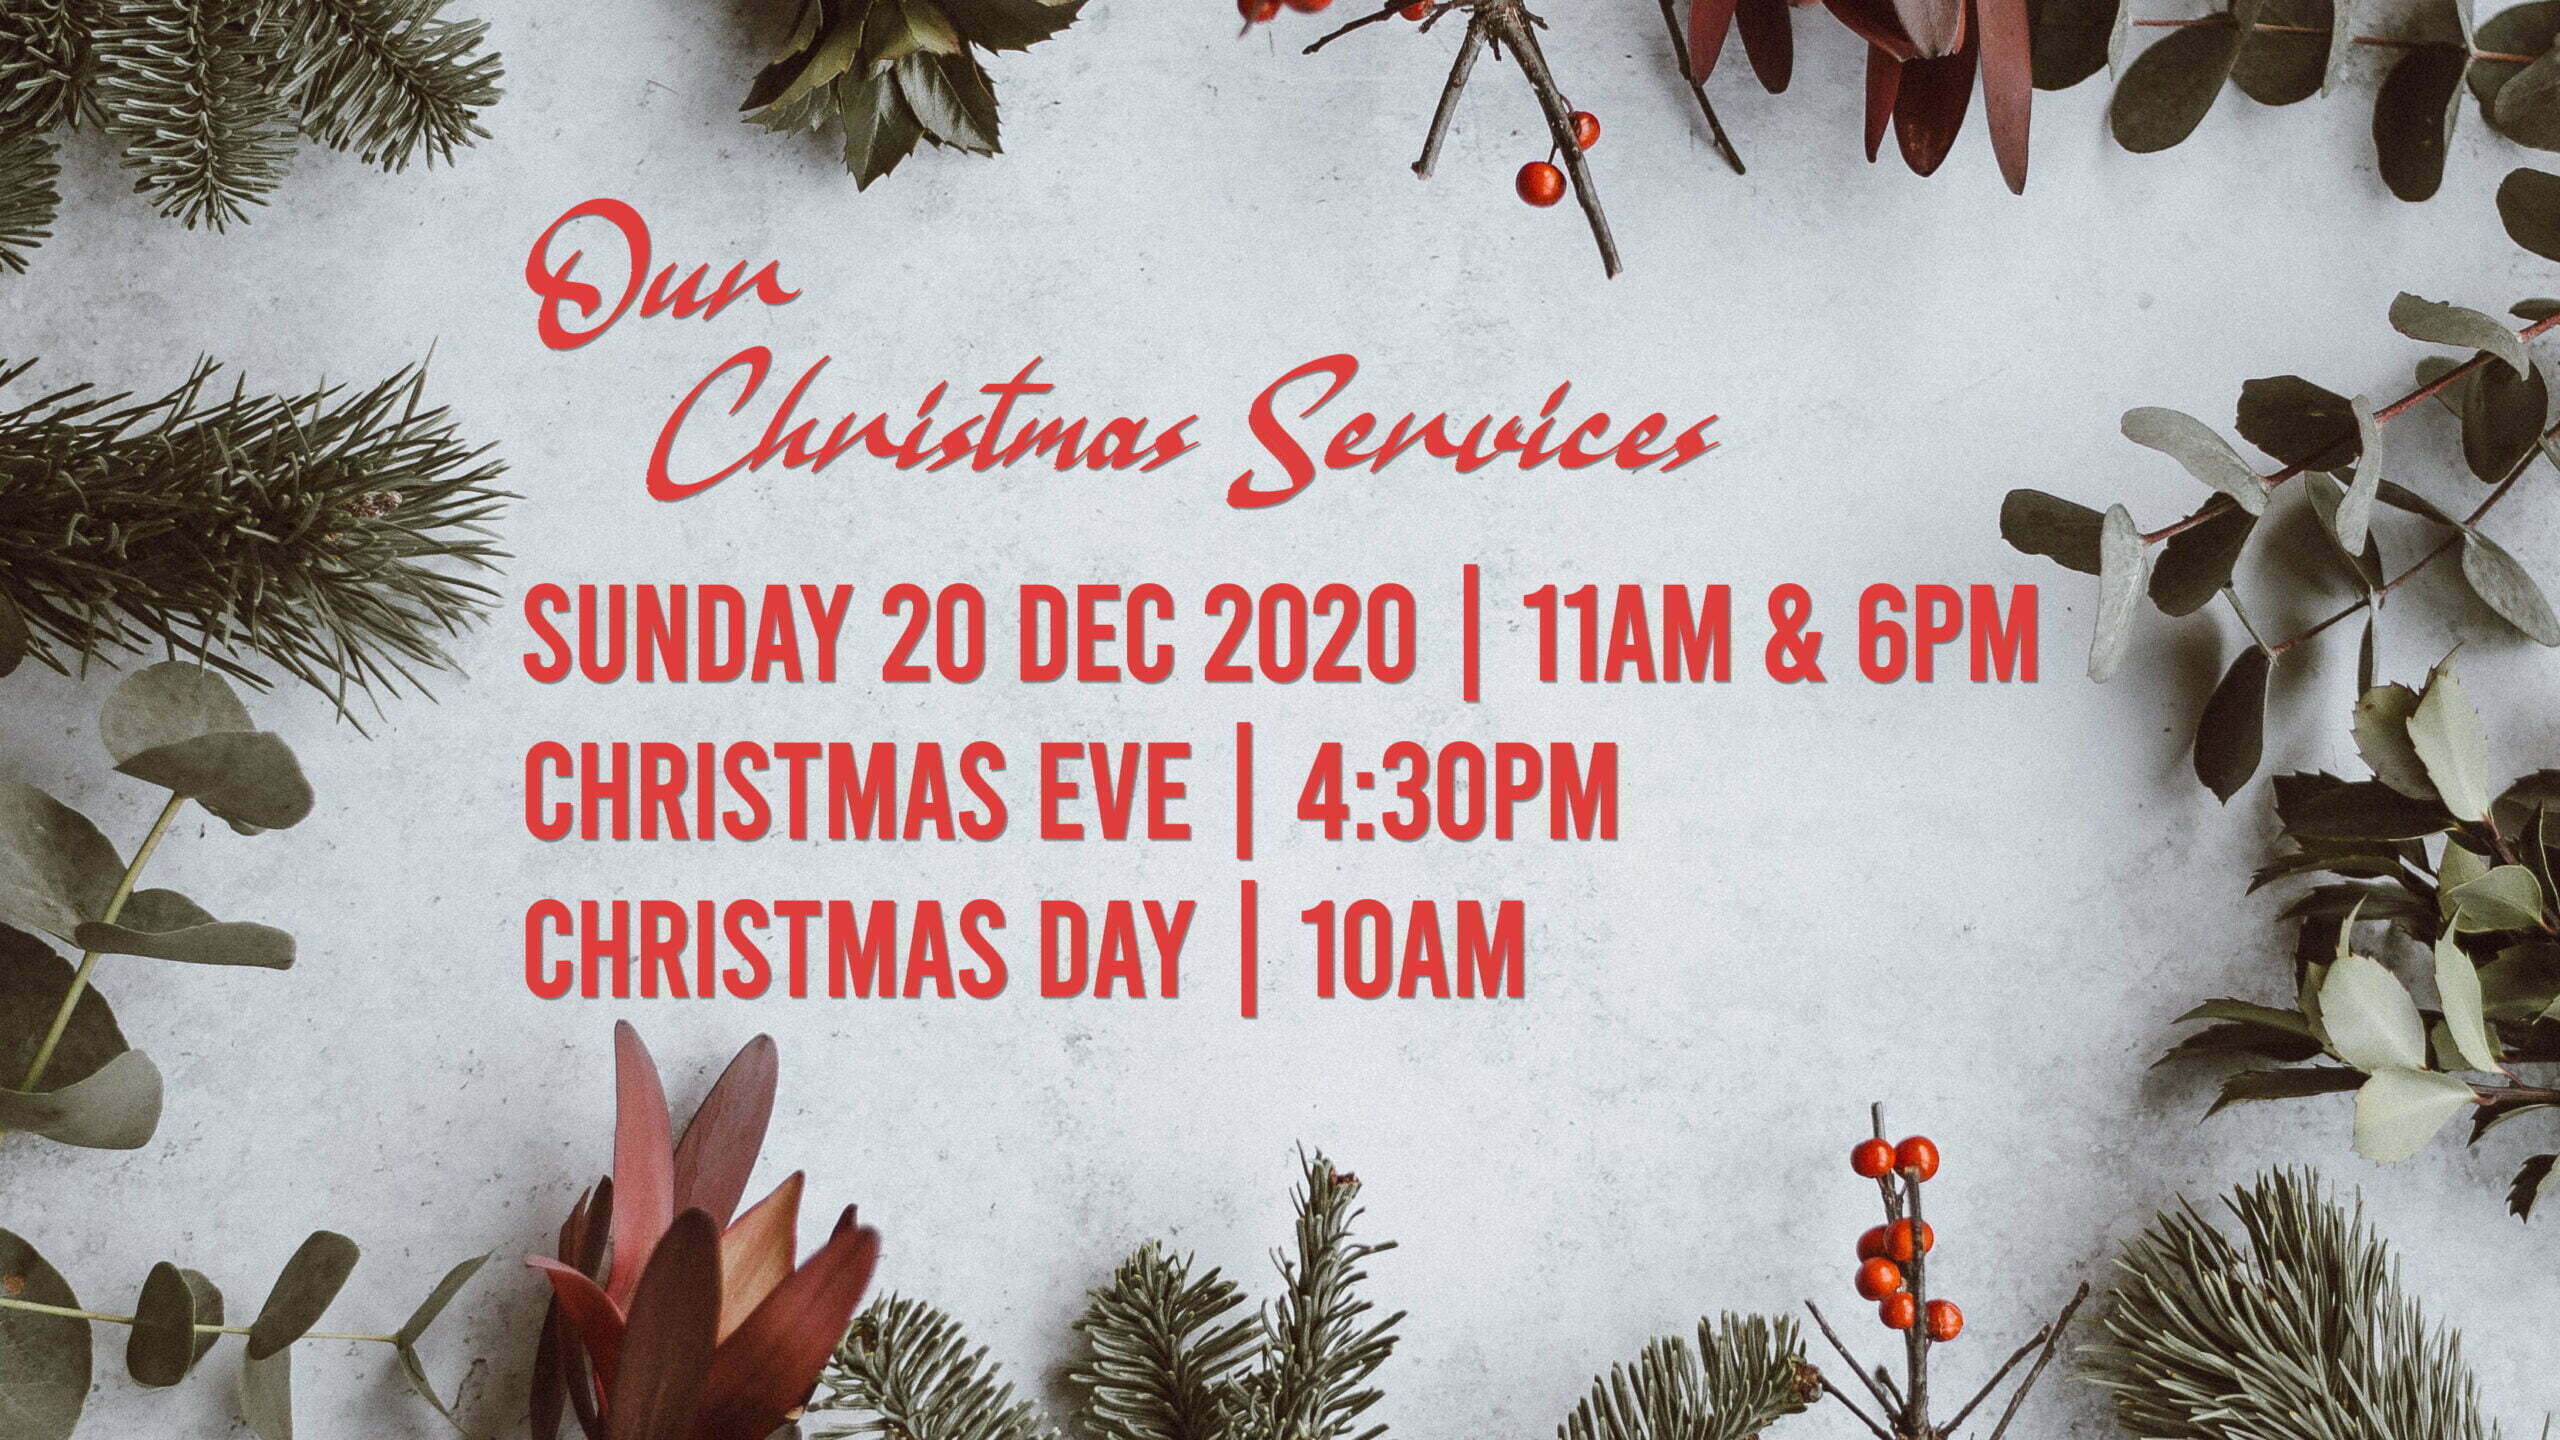 Our Christmas Services